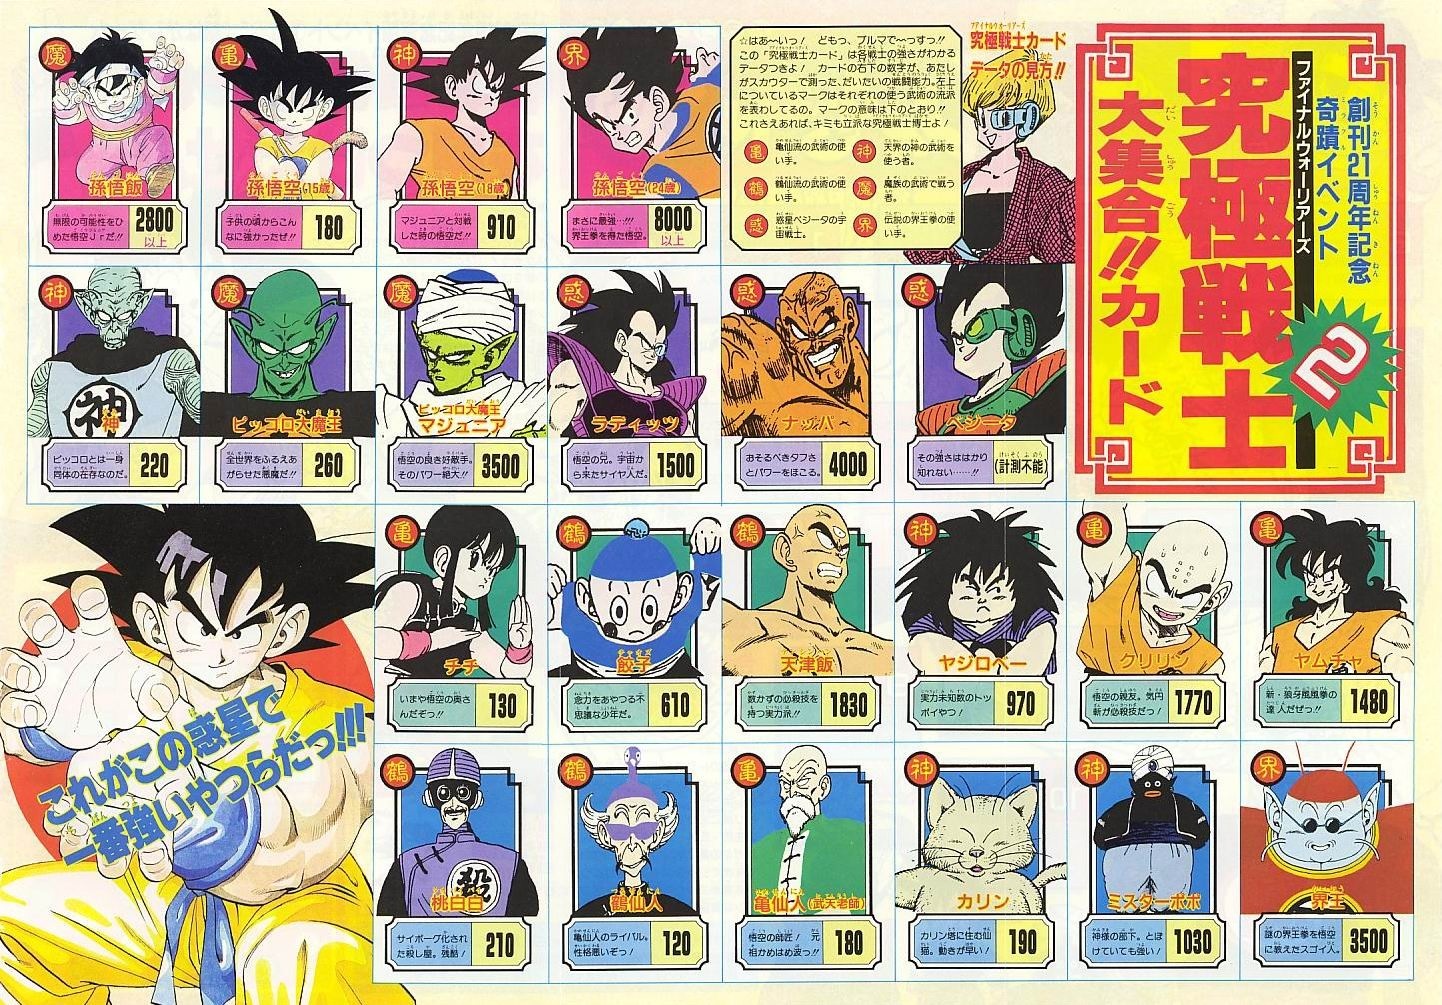 Every Dragon Ball Z power level: The comprehensive, canonical